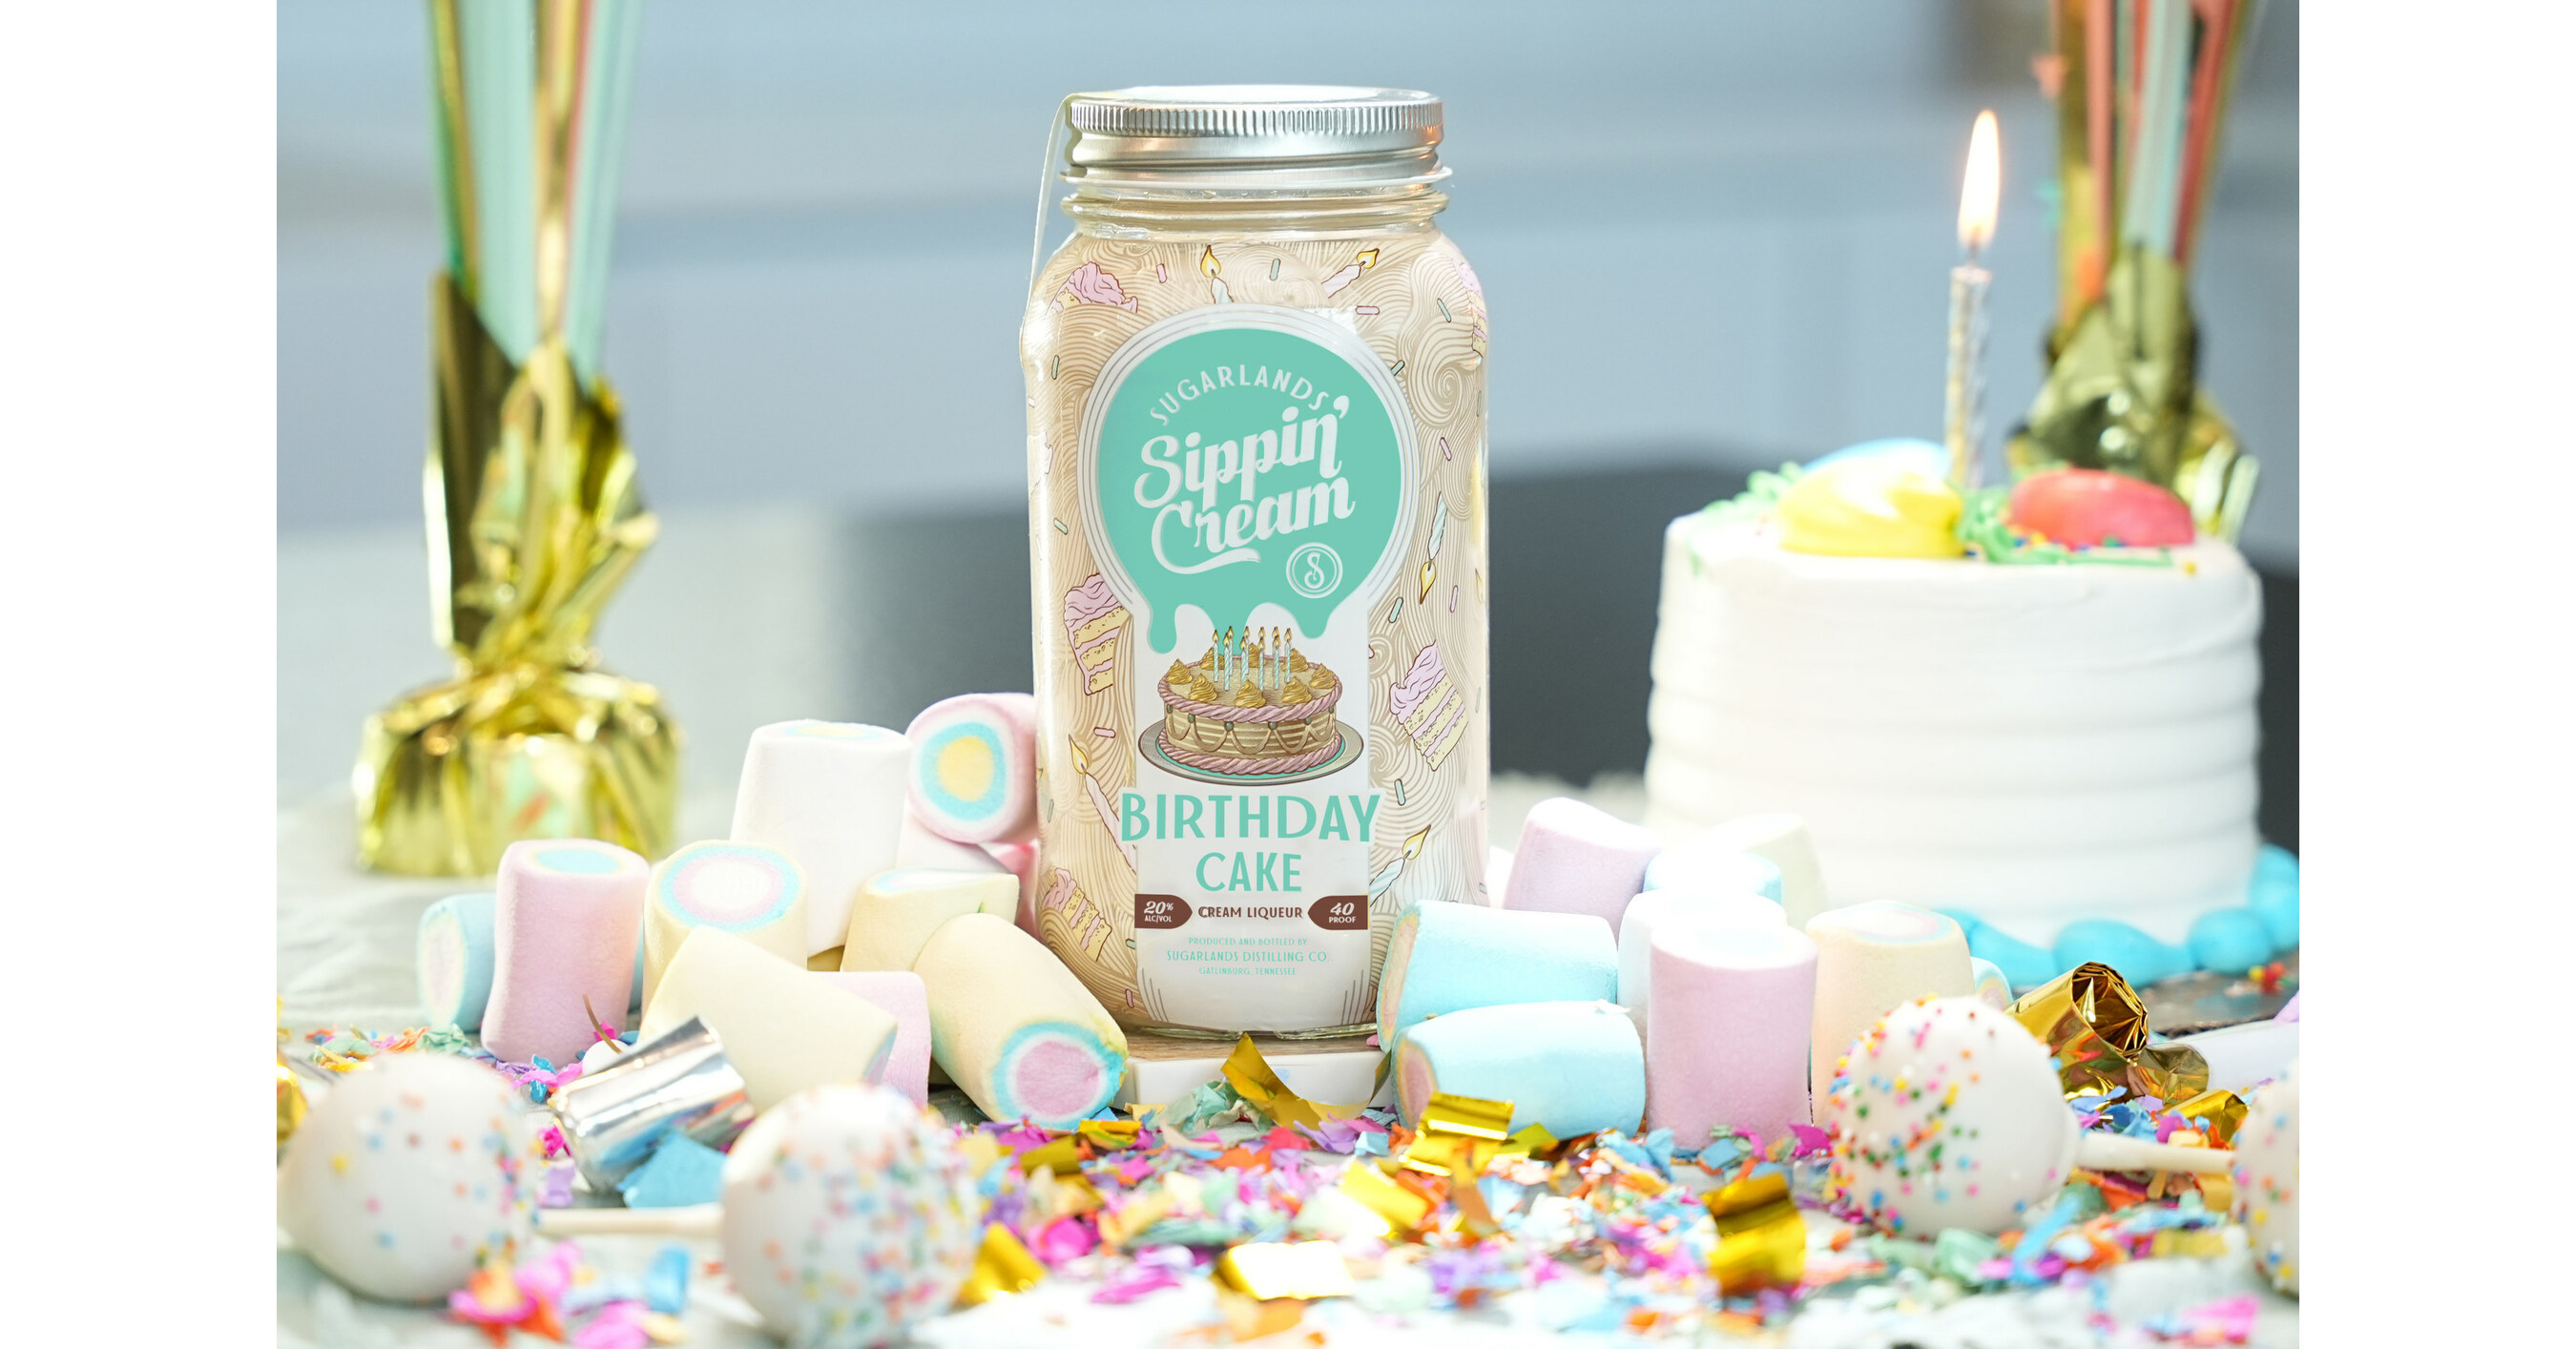 Sugarlands Introduces Birthday Cake Sippin Cream, Golic Family as Brand Ambassadors